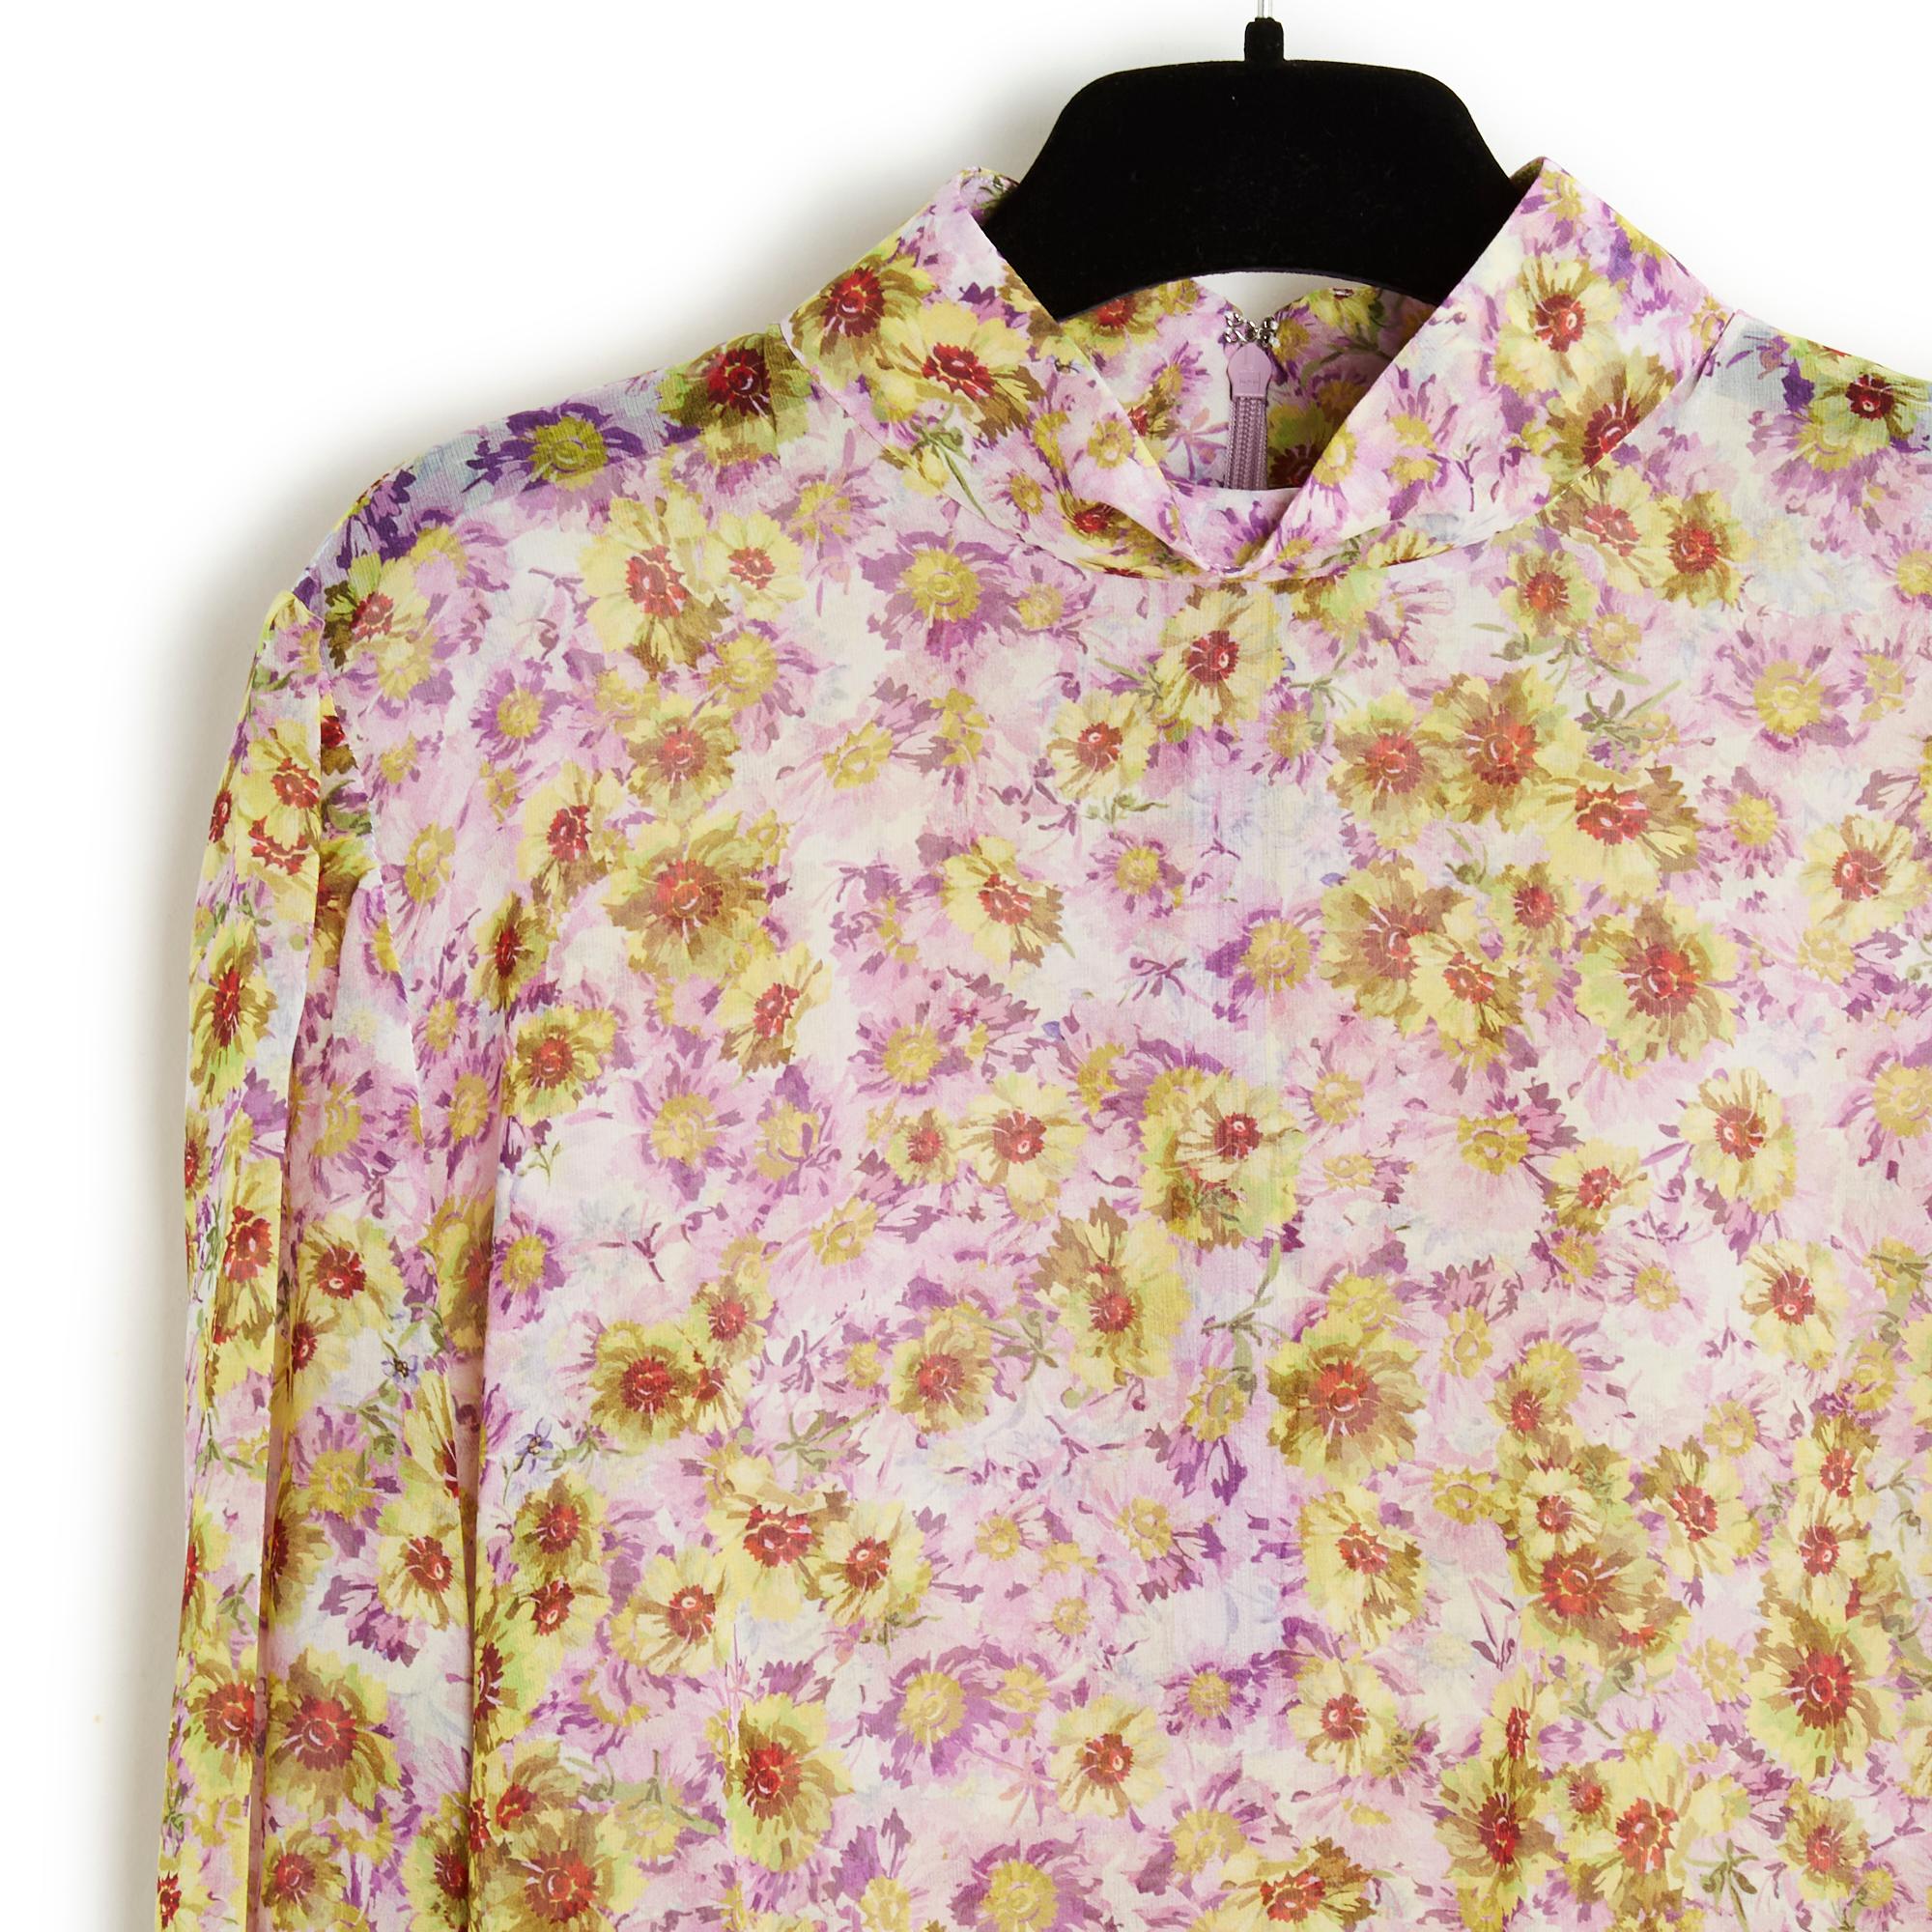 Top Giambattista Valli blouse in slightly transparent silk crepe with floral print in shades of pink, purple and yellow green, straight cut, high collar closed with a long zip and hook in the back, very long puffed sleeves at the wrist, closed with